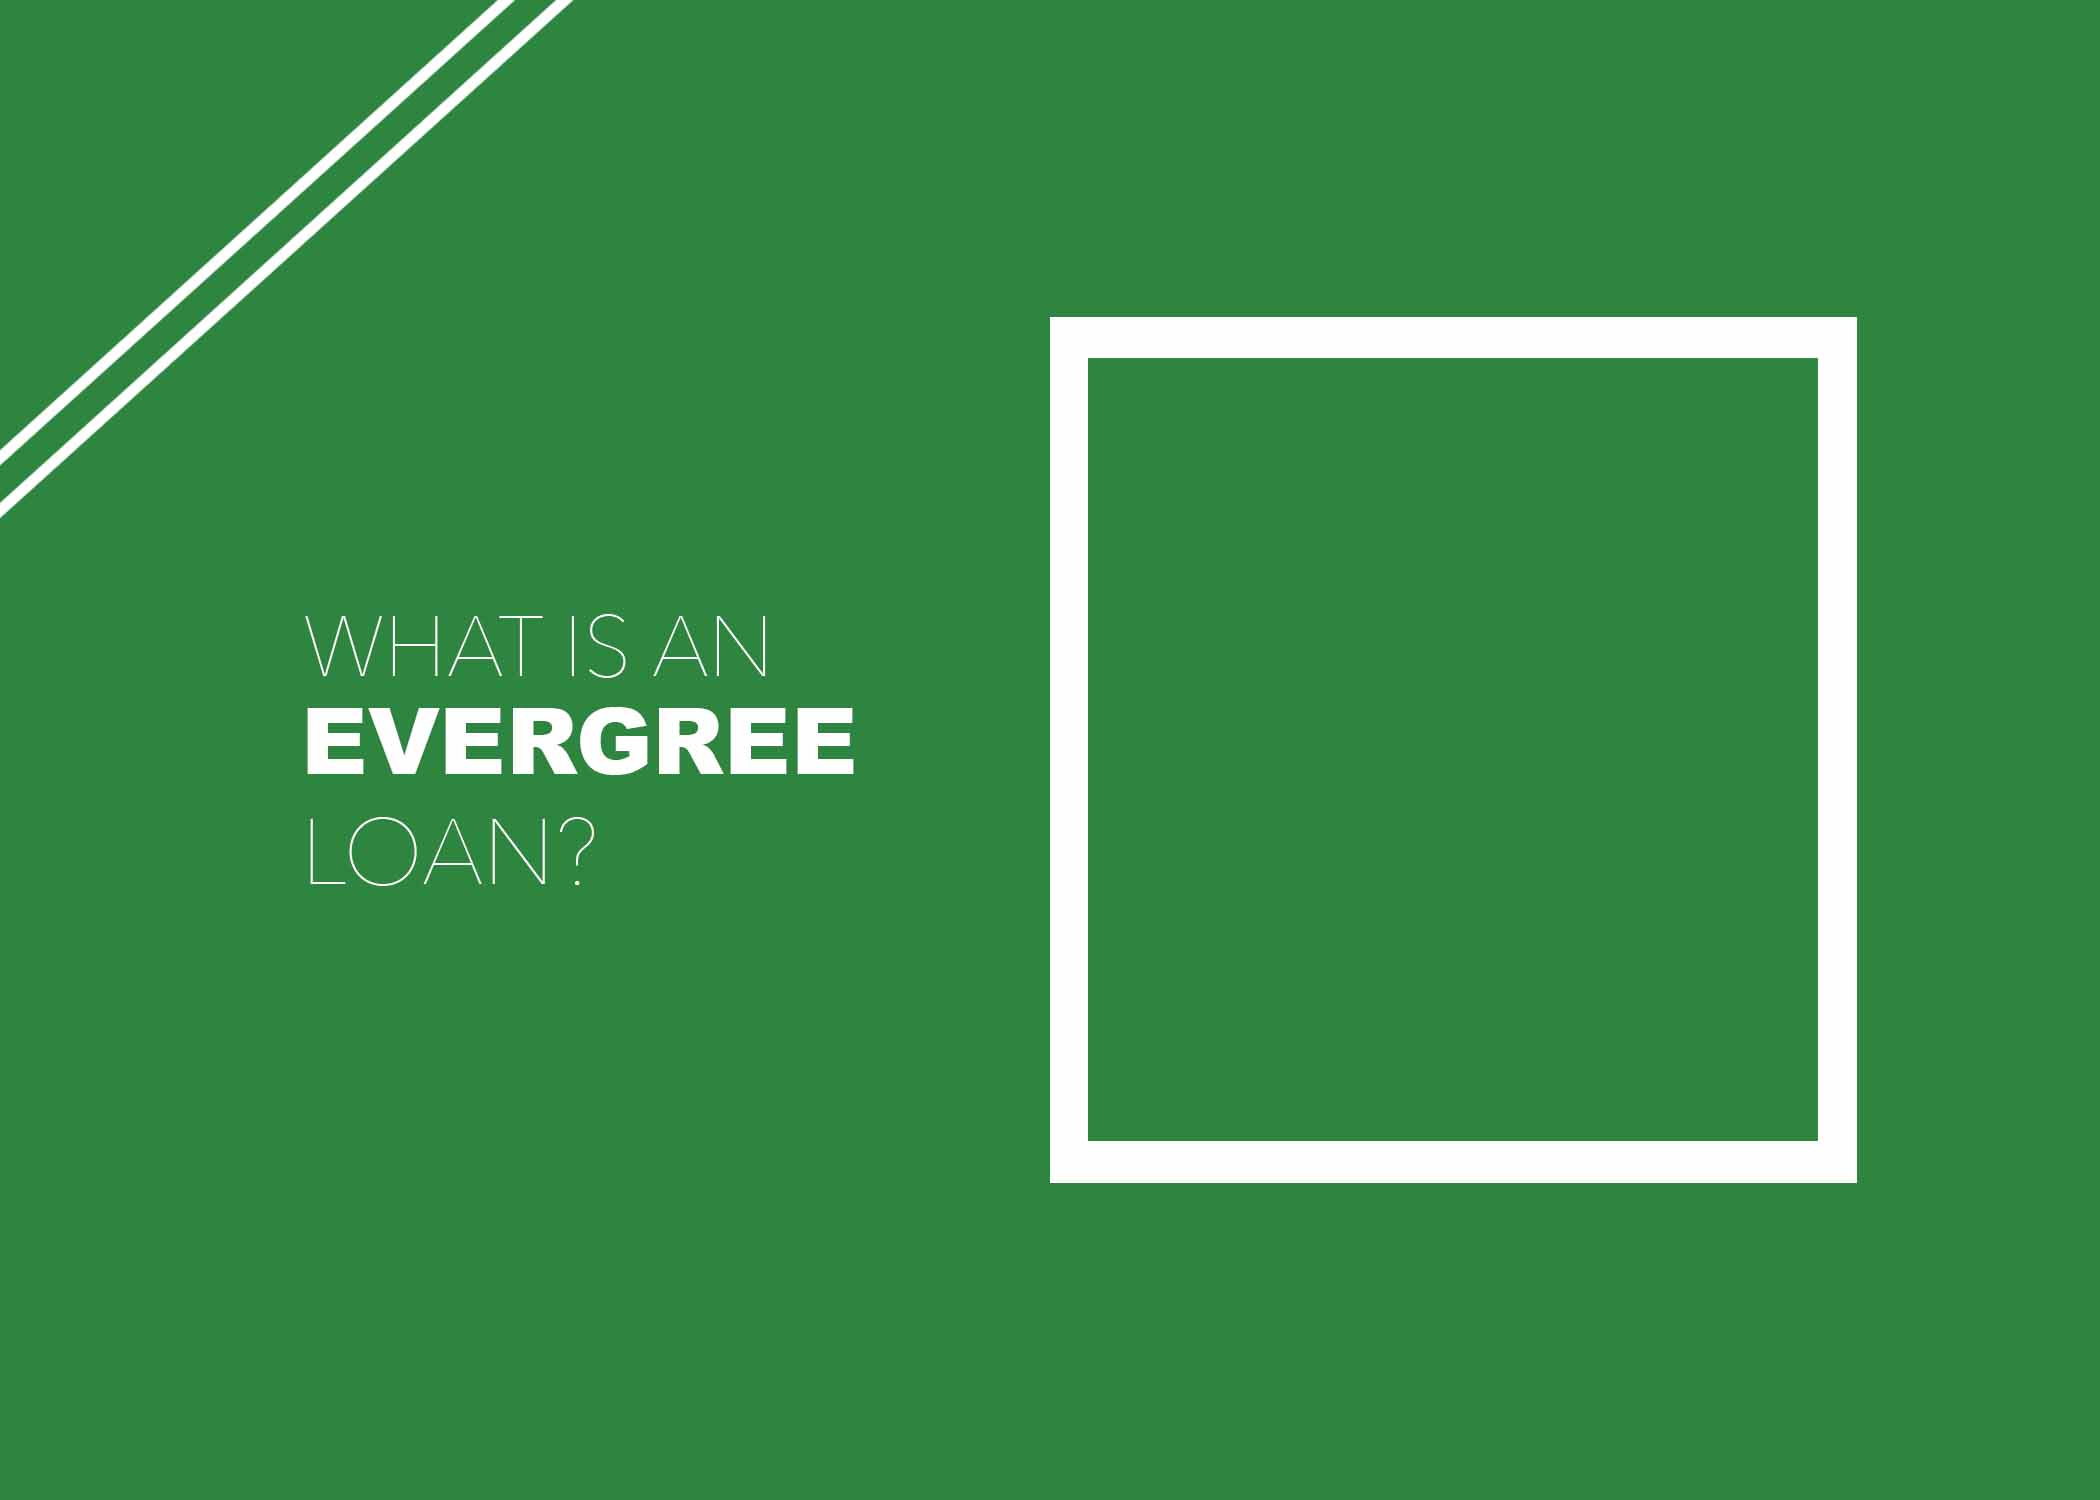 What is an Evergreen Loan?